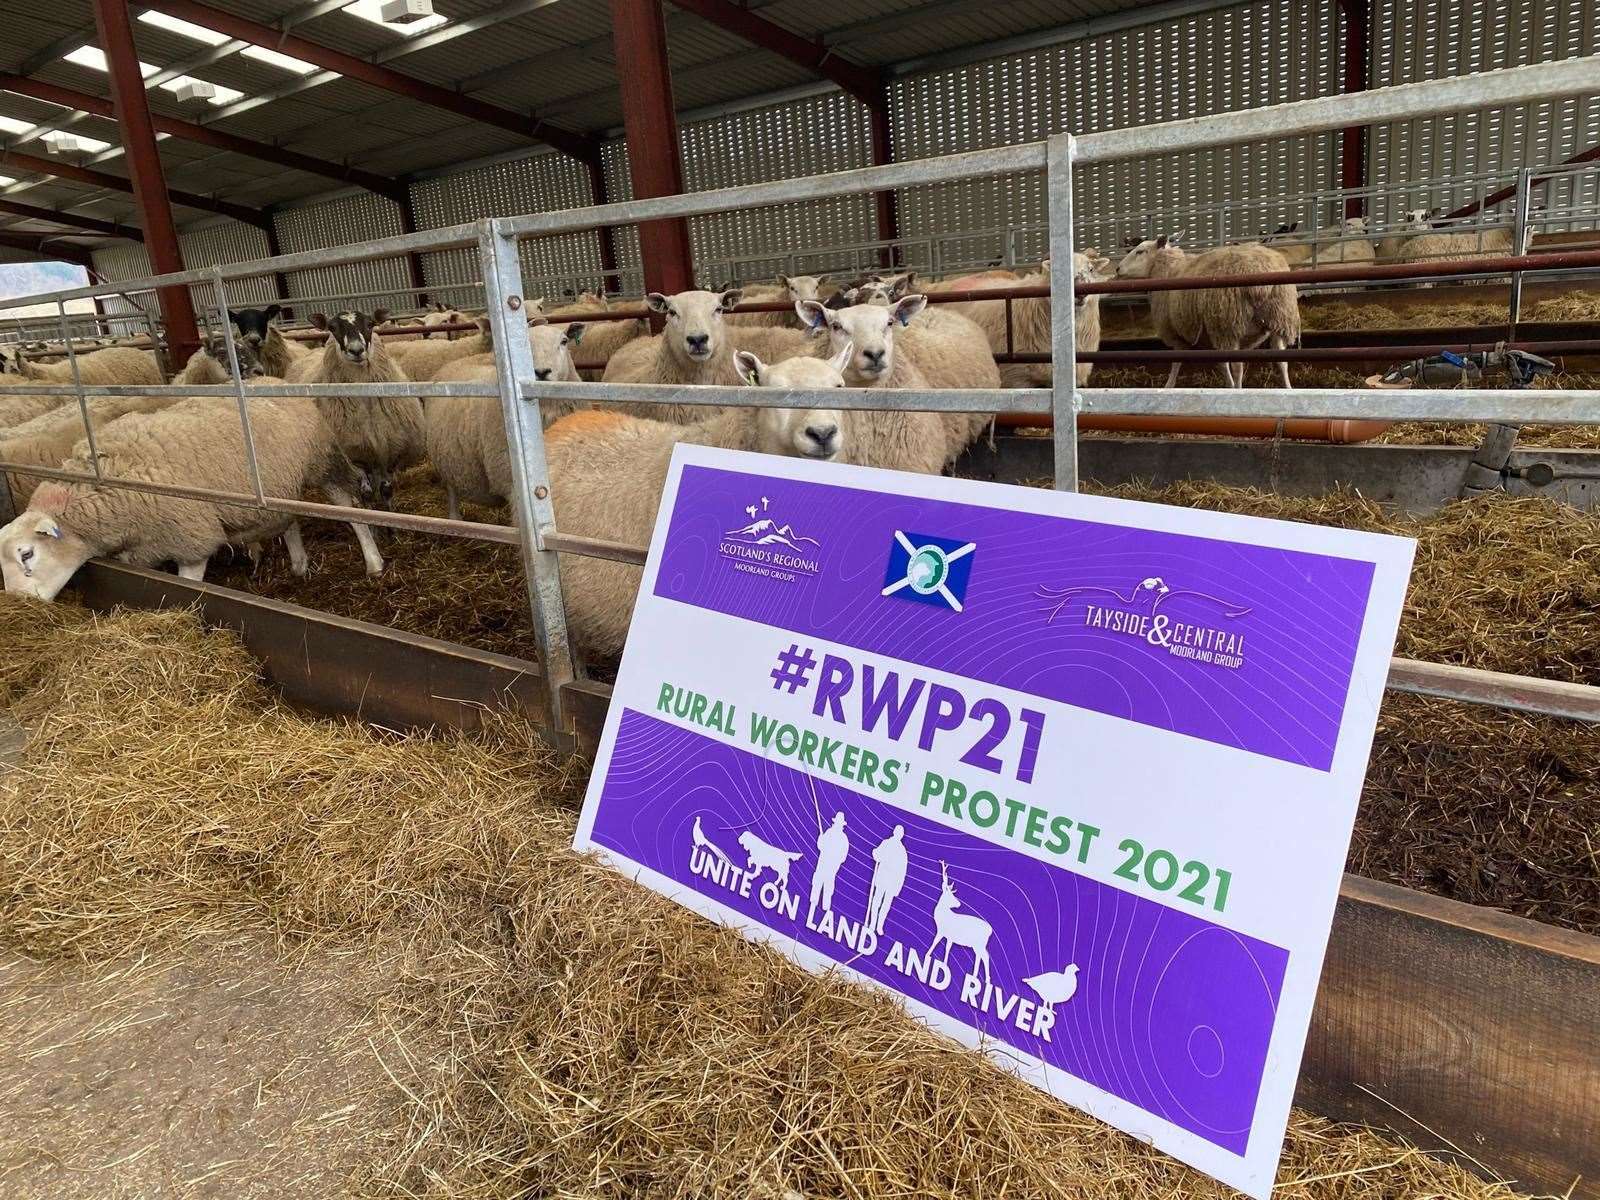 An official Rural Workers’ Protest banner pictured on a farm in Highland Perthshire.